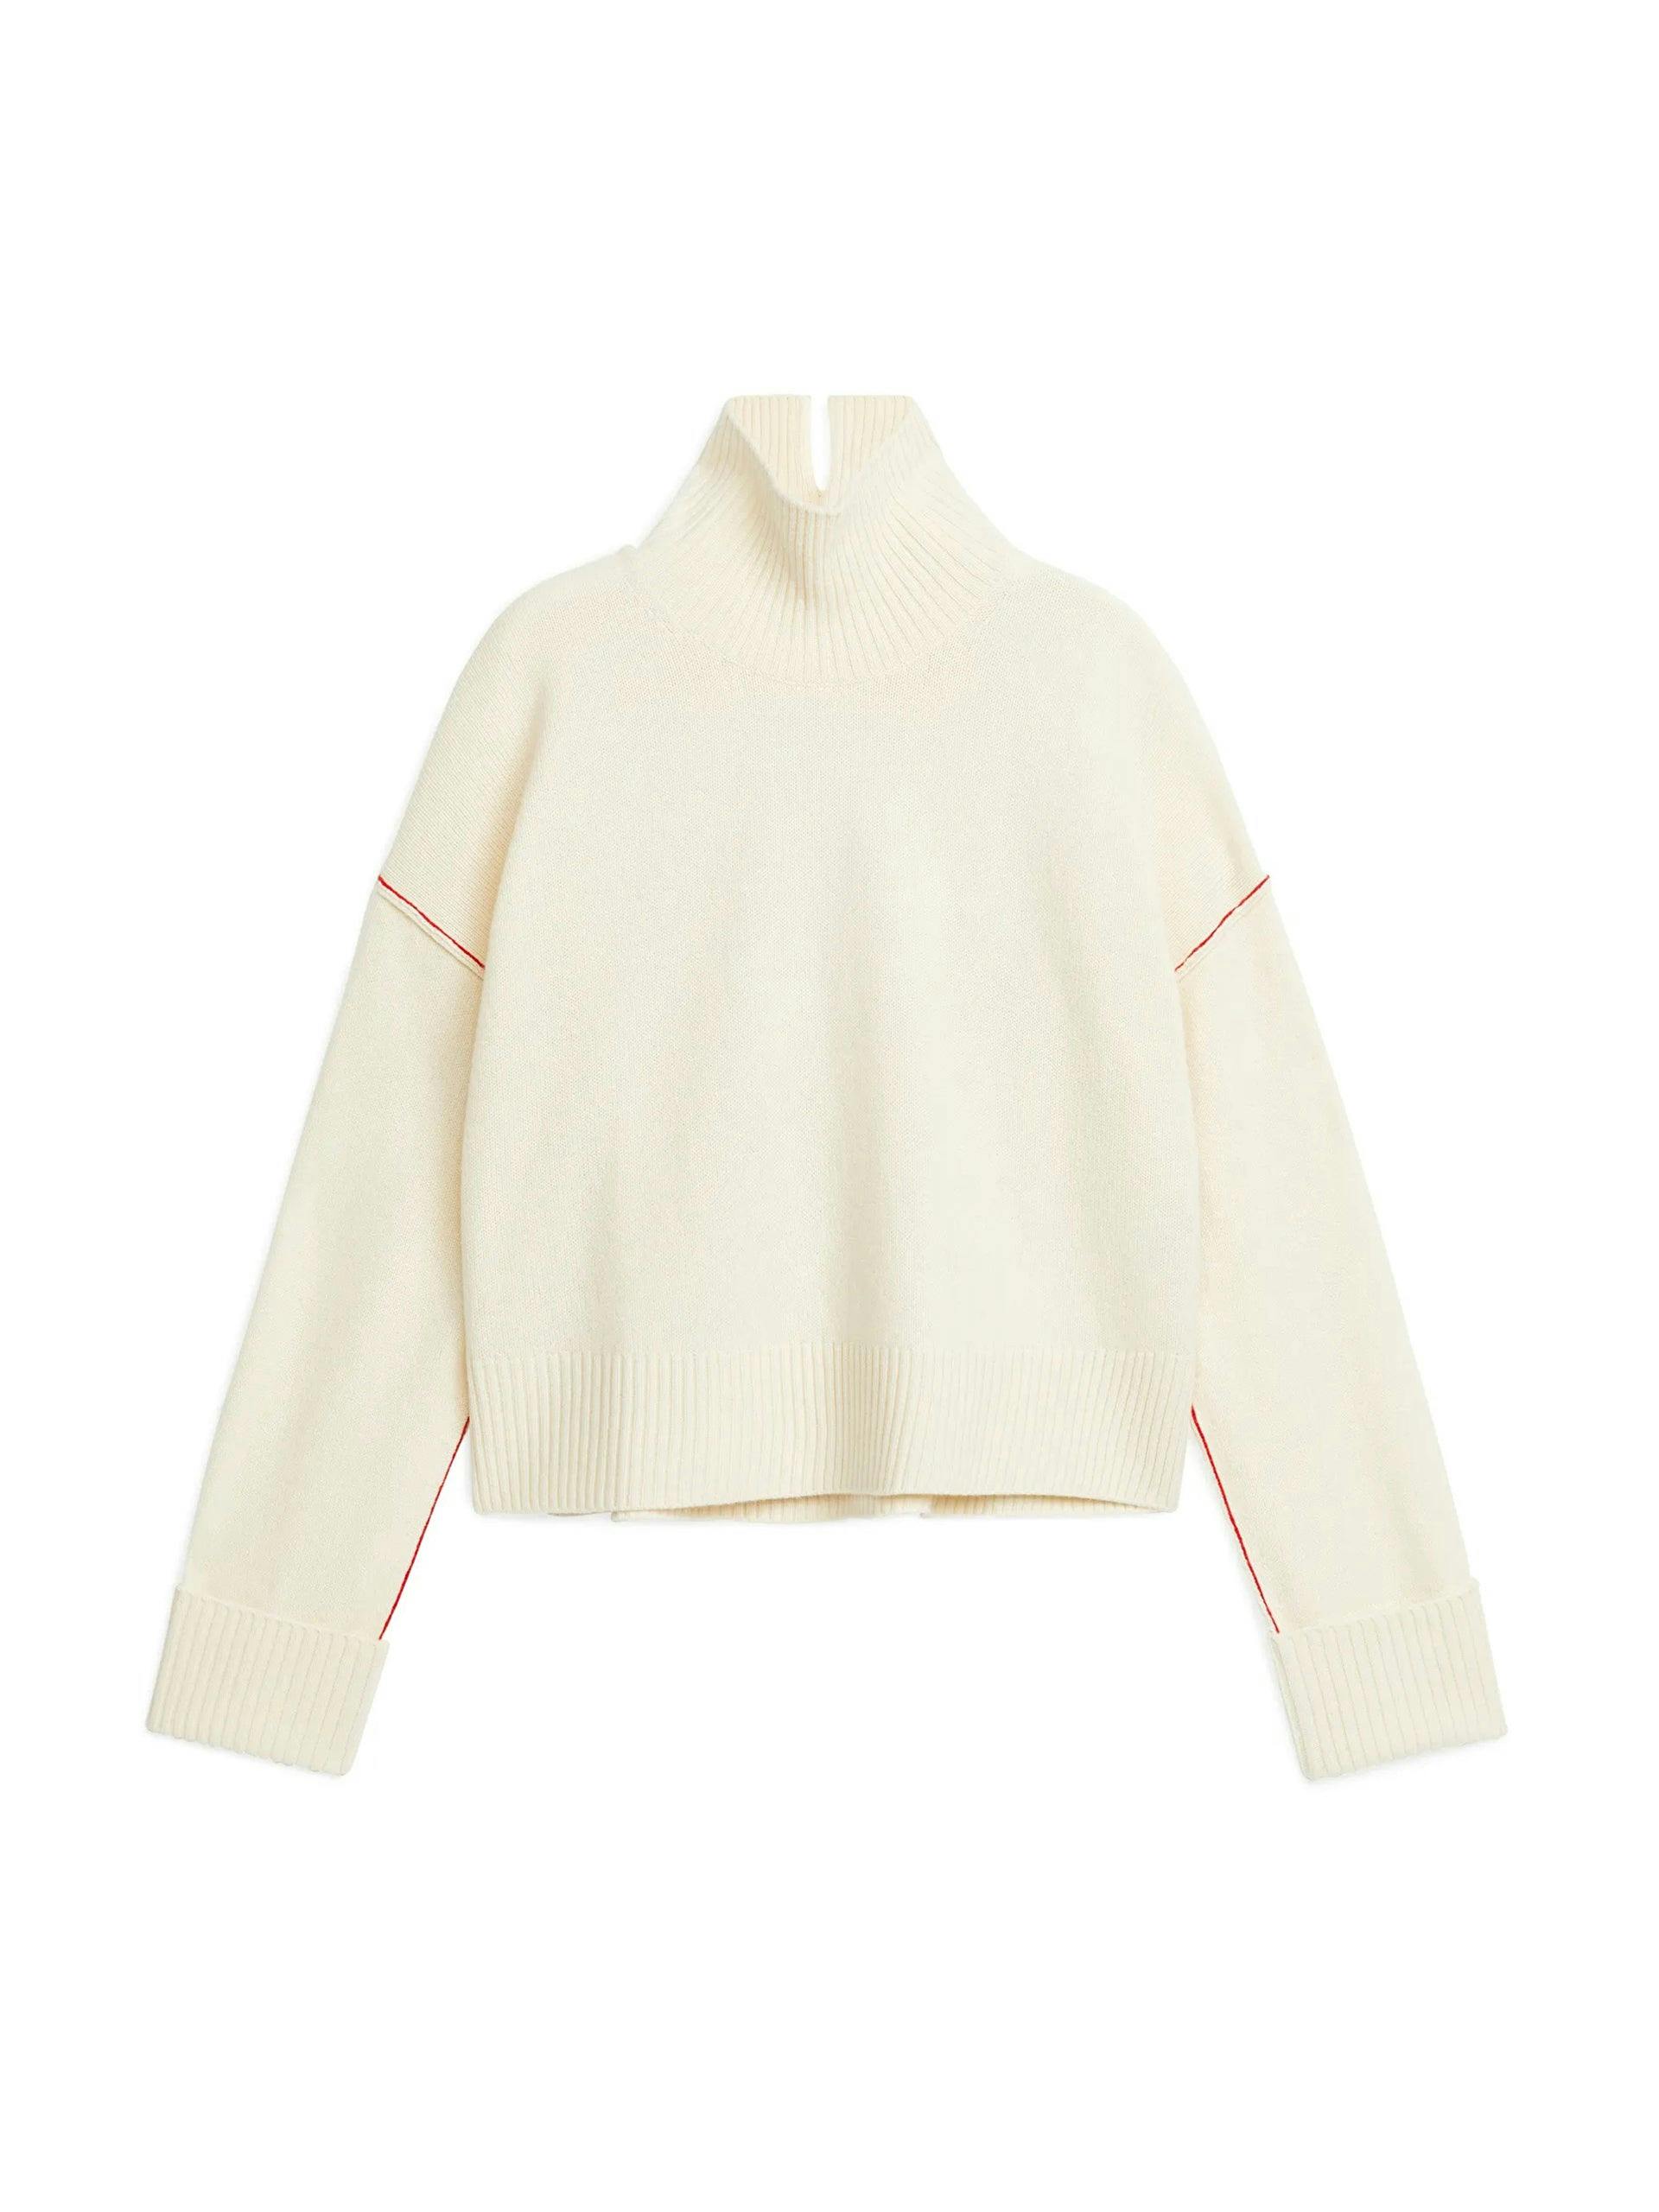 White wool jumper with red ribbed details